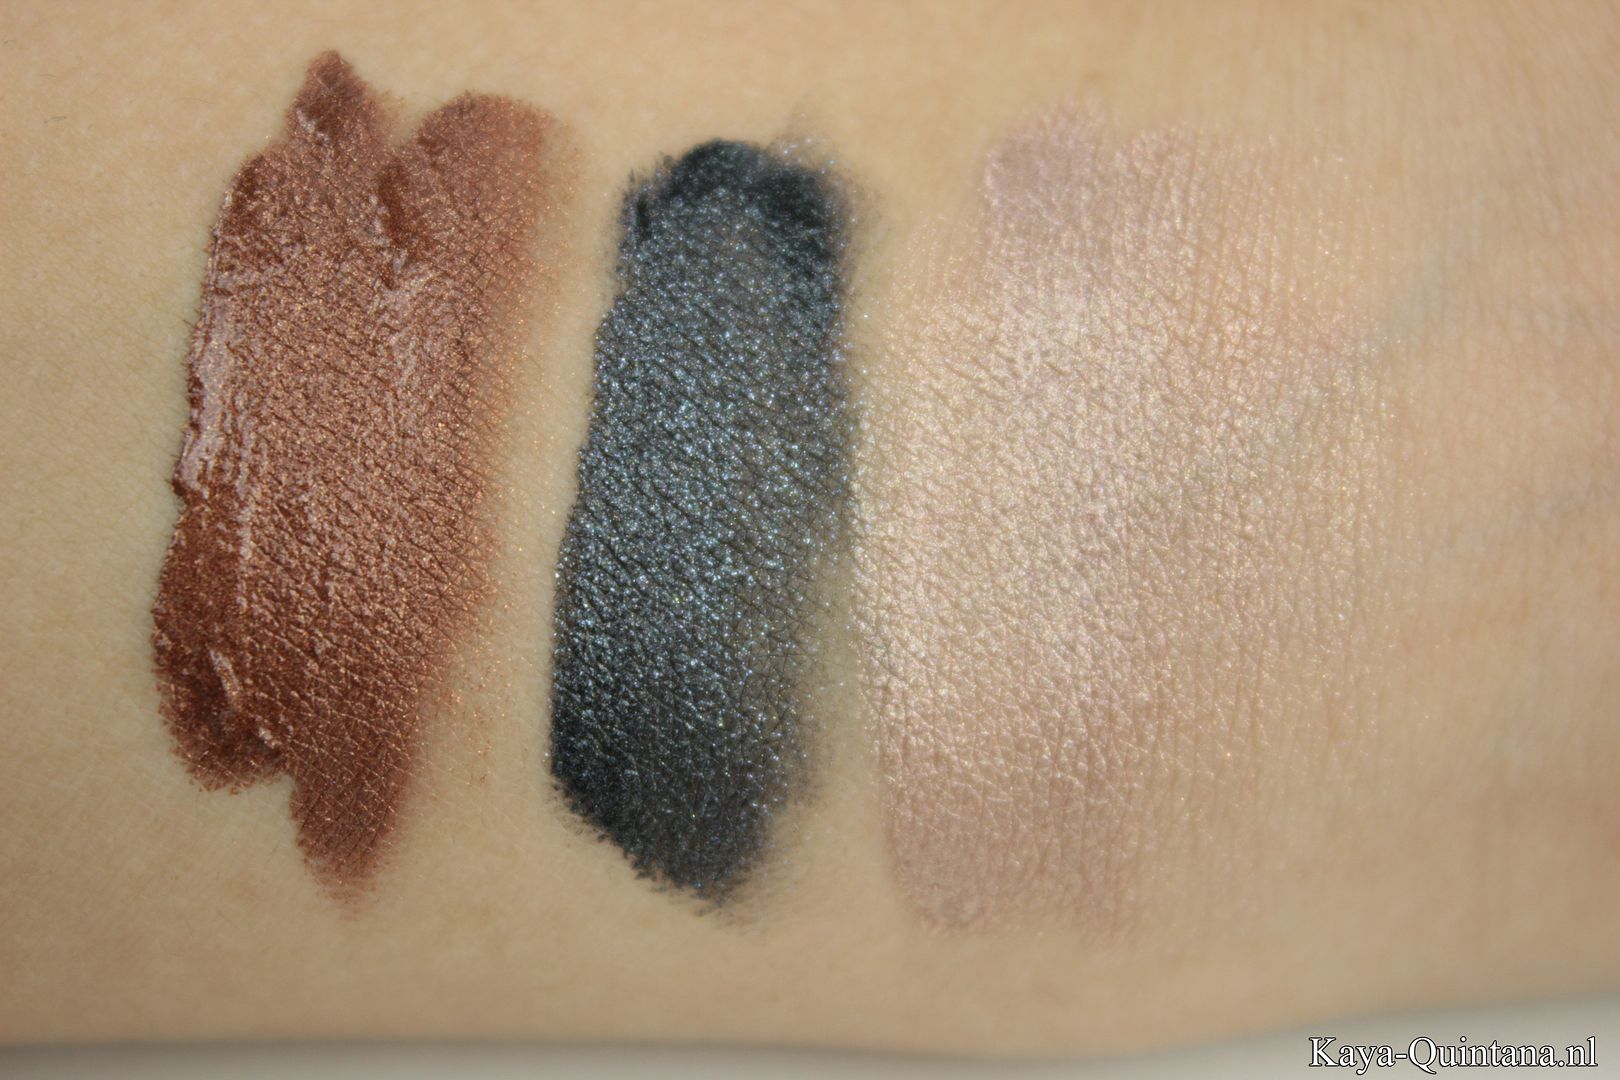 max factor excess shimmer eye shadow swatches